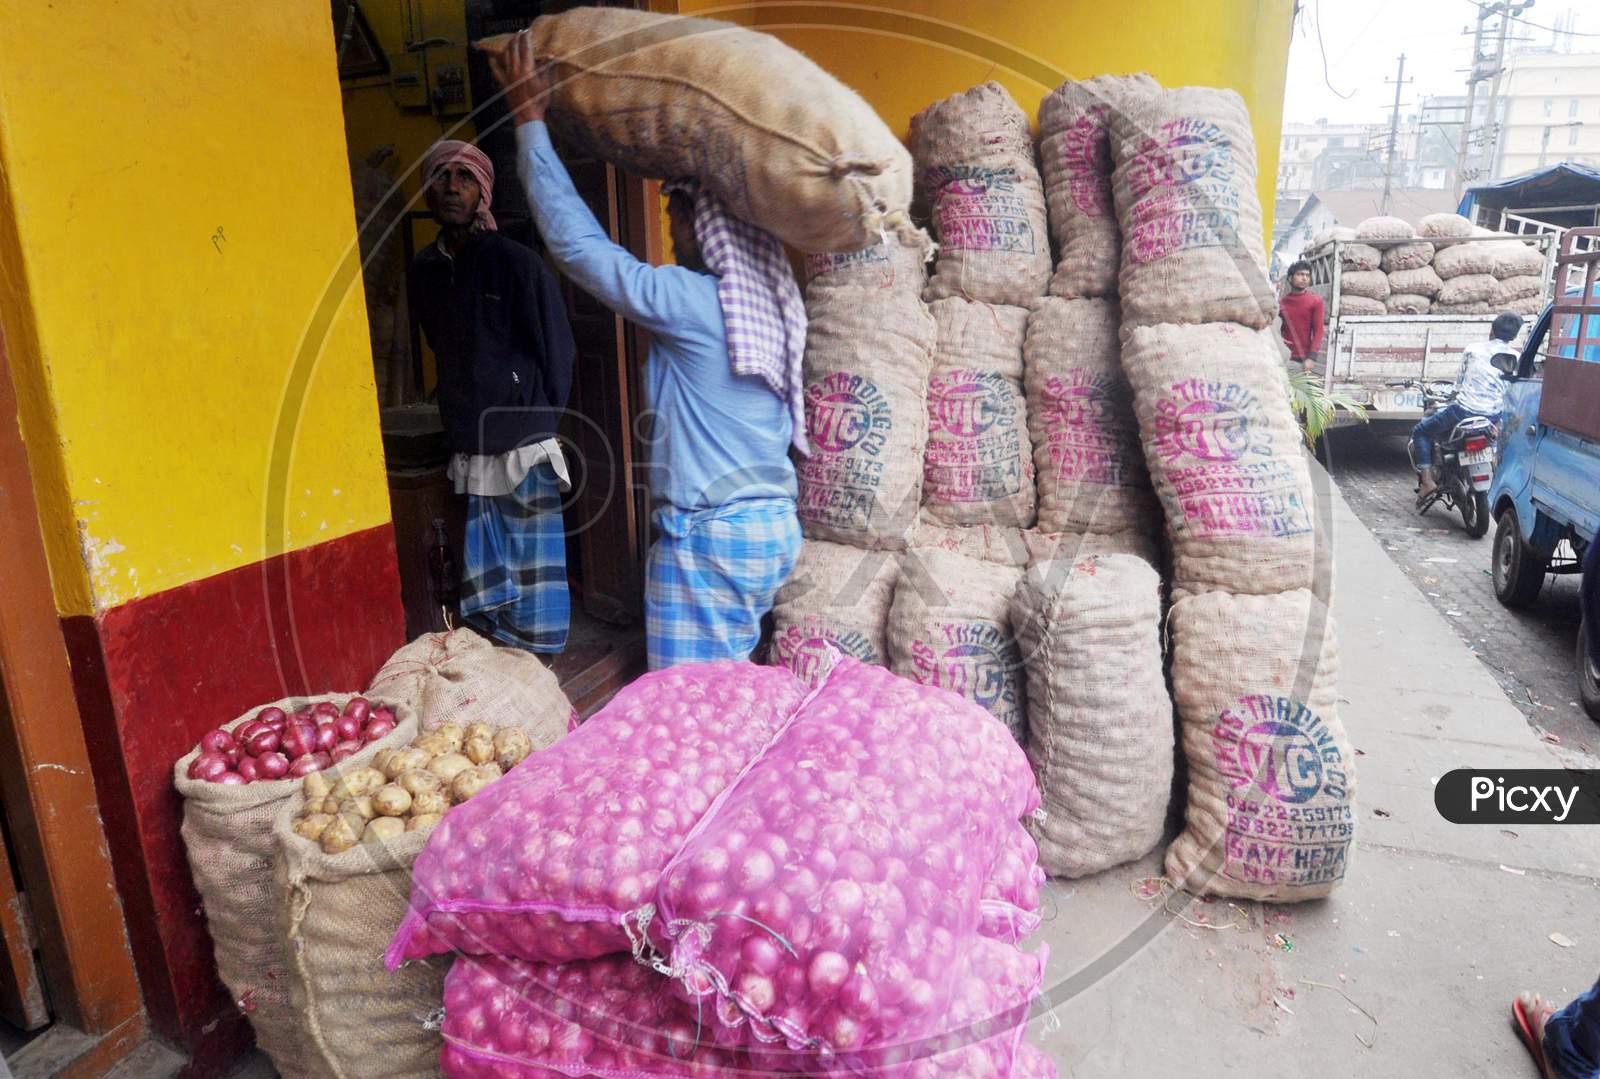 Guwahati: Workers Carrying Beside Sacks Of Potatoes And Onions At A Market In Guwahati, Saturday, Feb 1, 2020. Finance Minister Nirmala Sitharaman Presented The Union Budget In Parliament Today.